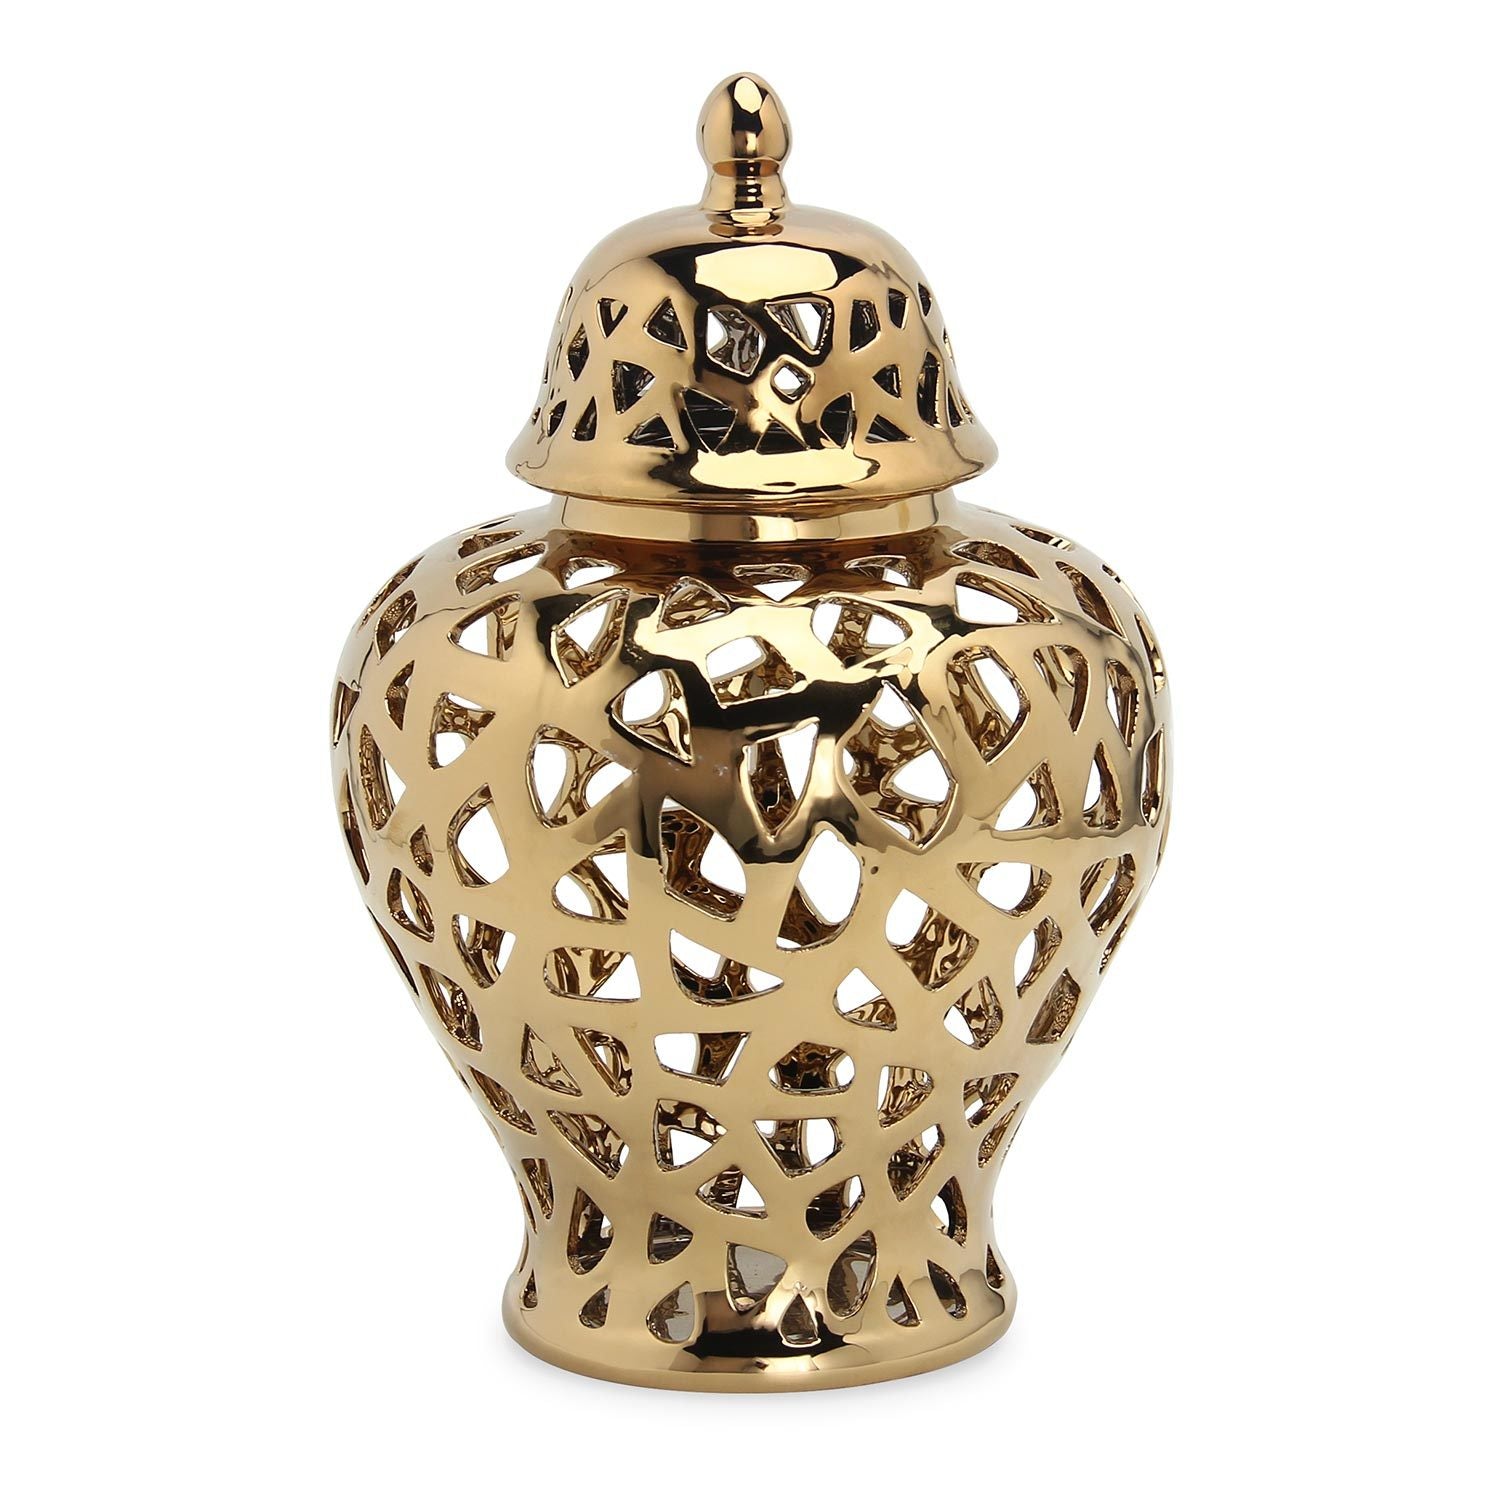 A Gold Ceramic Ginger Jar Vase with Decorative Design with an intricate design.